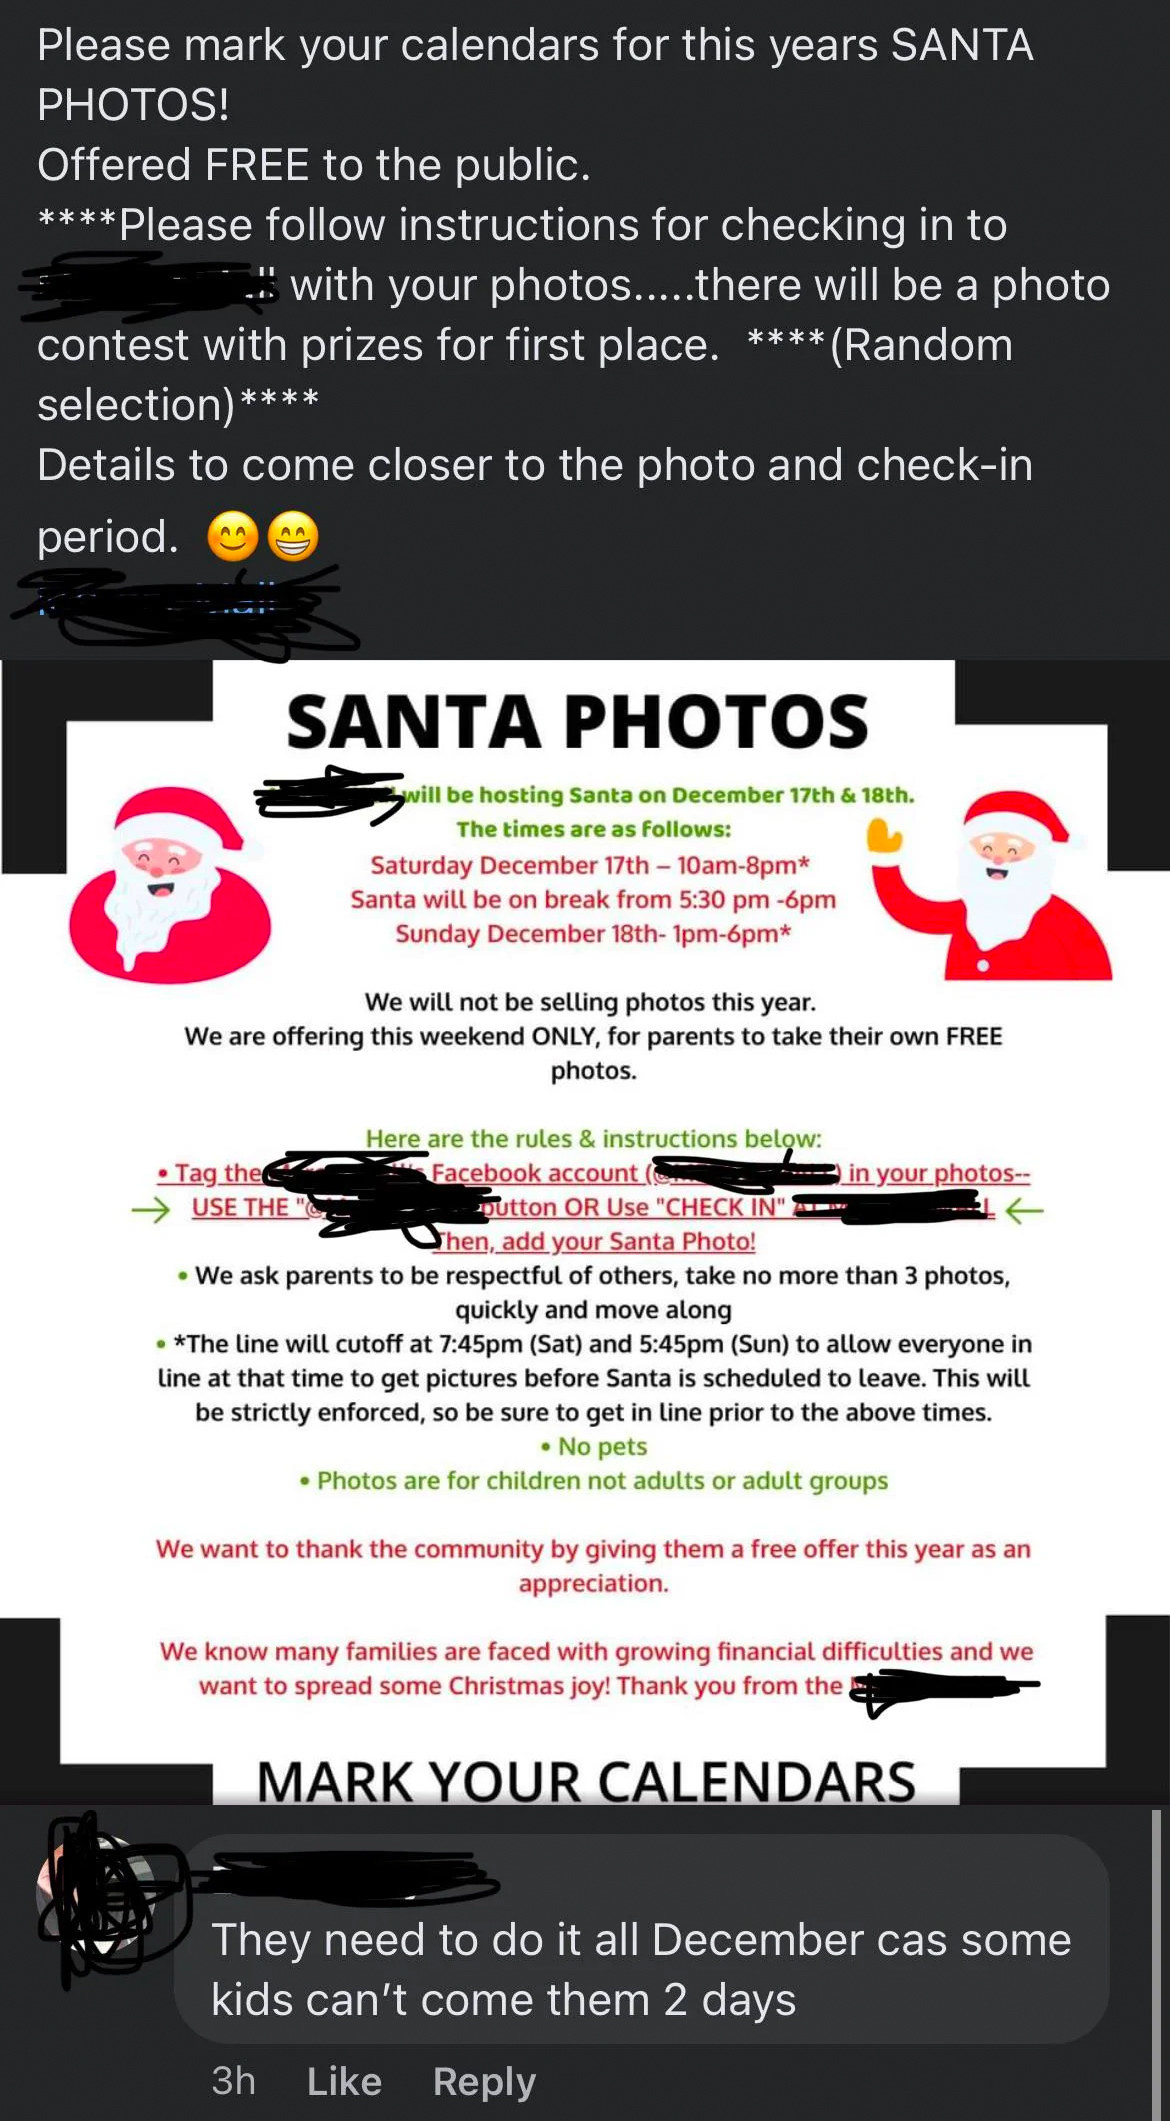 Person complaining about two free Santa photo days in December: &quot;They need to do it all December as some kids can&#x27;t come them 2 days&quot;